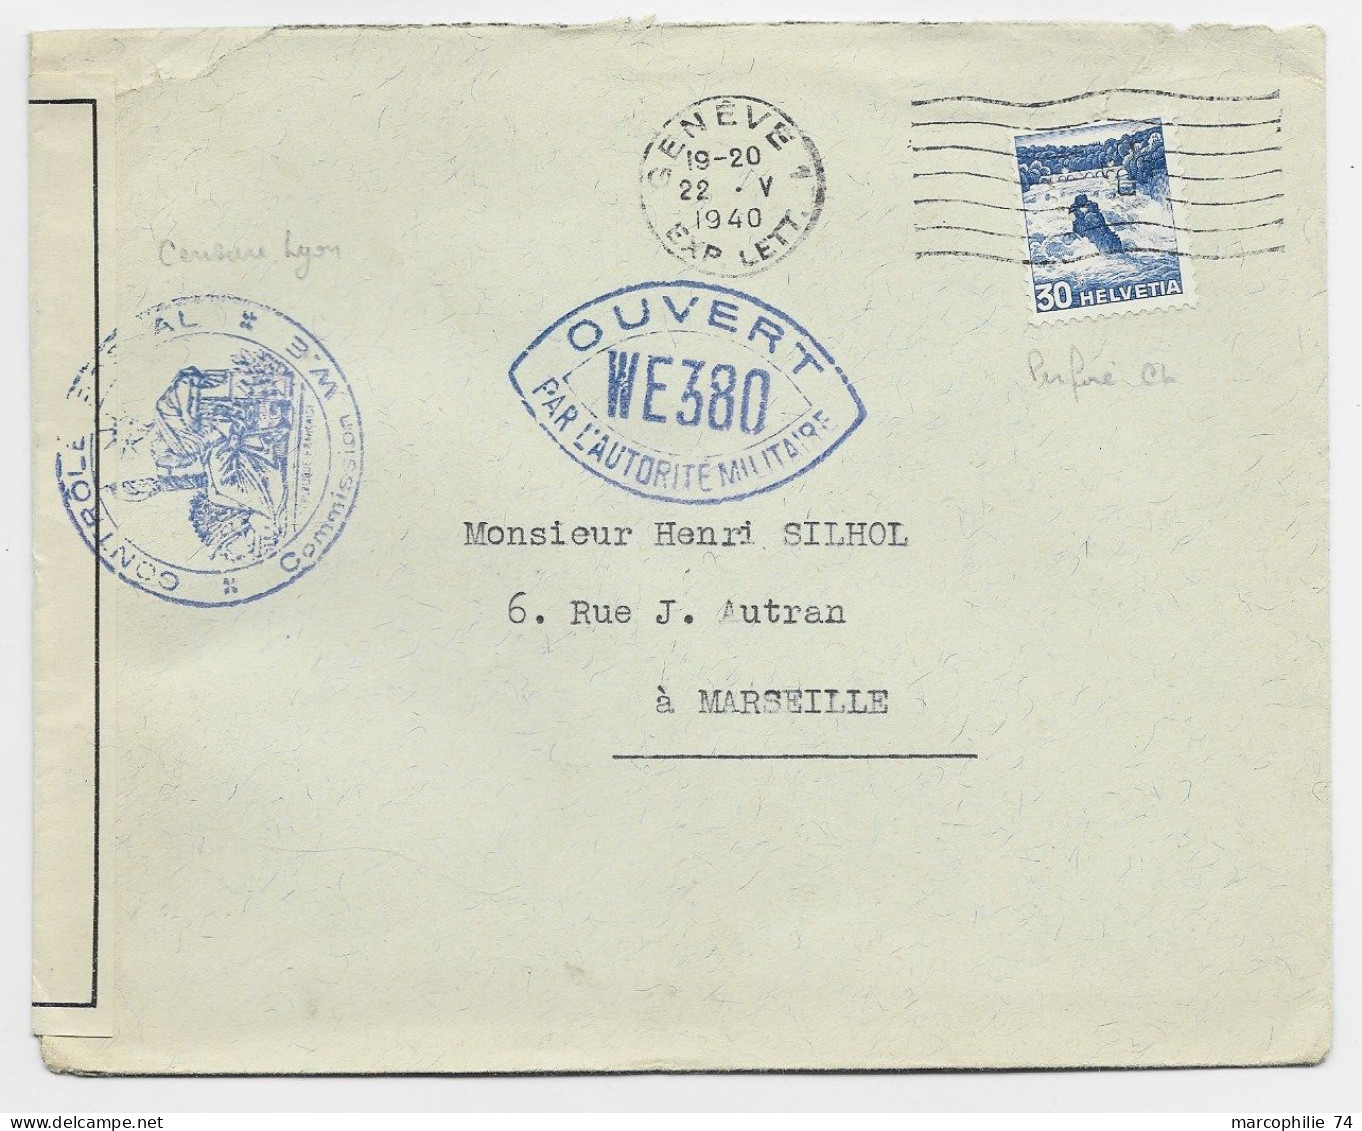 SUISSE HELVETIA 30C PERFIN PERFORE C.L. LETTRE COVER MEC GENEVE 22.V.1940 TO FRANCE CENSURE OUVERT WE 380 - Perfins